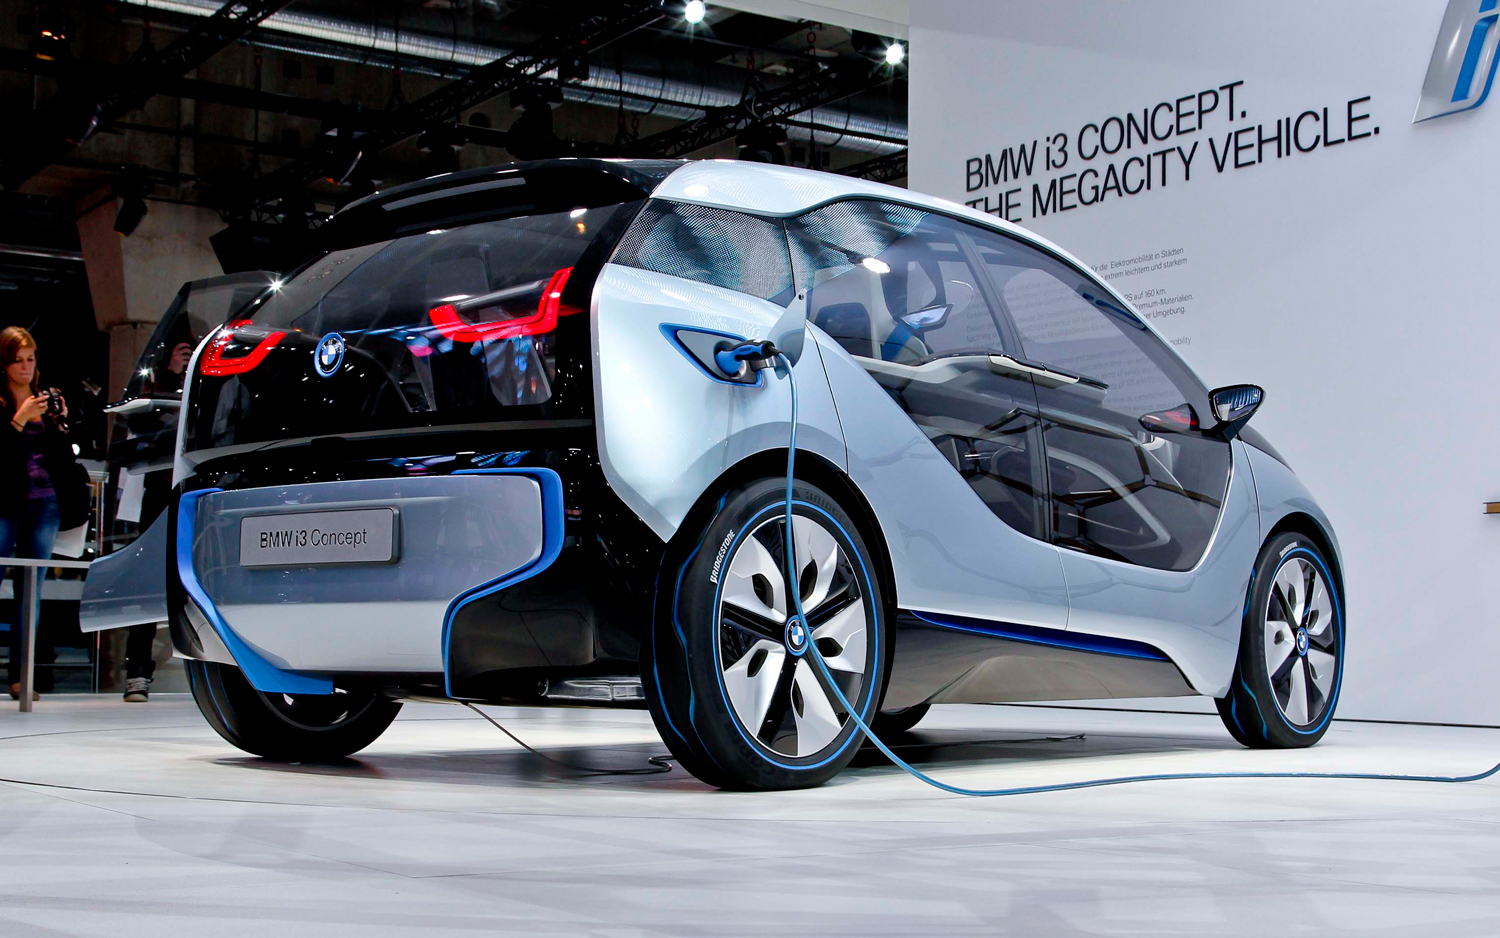 BMW-i3-Concept-rear-view